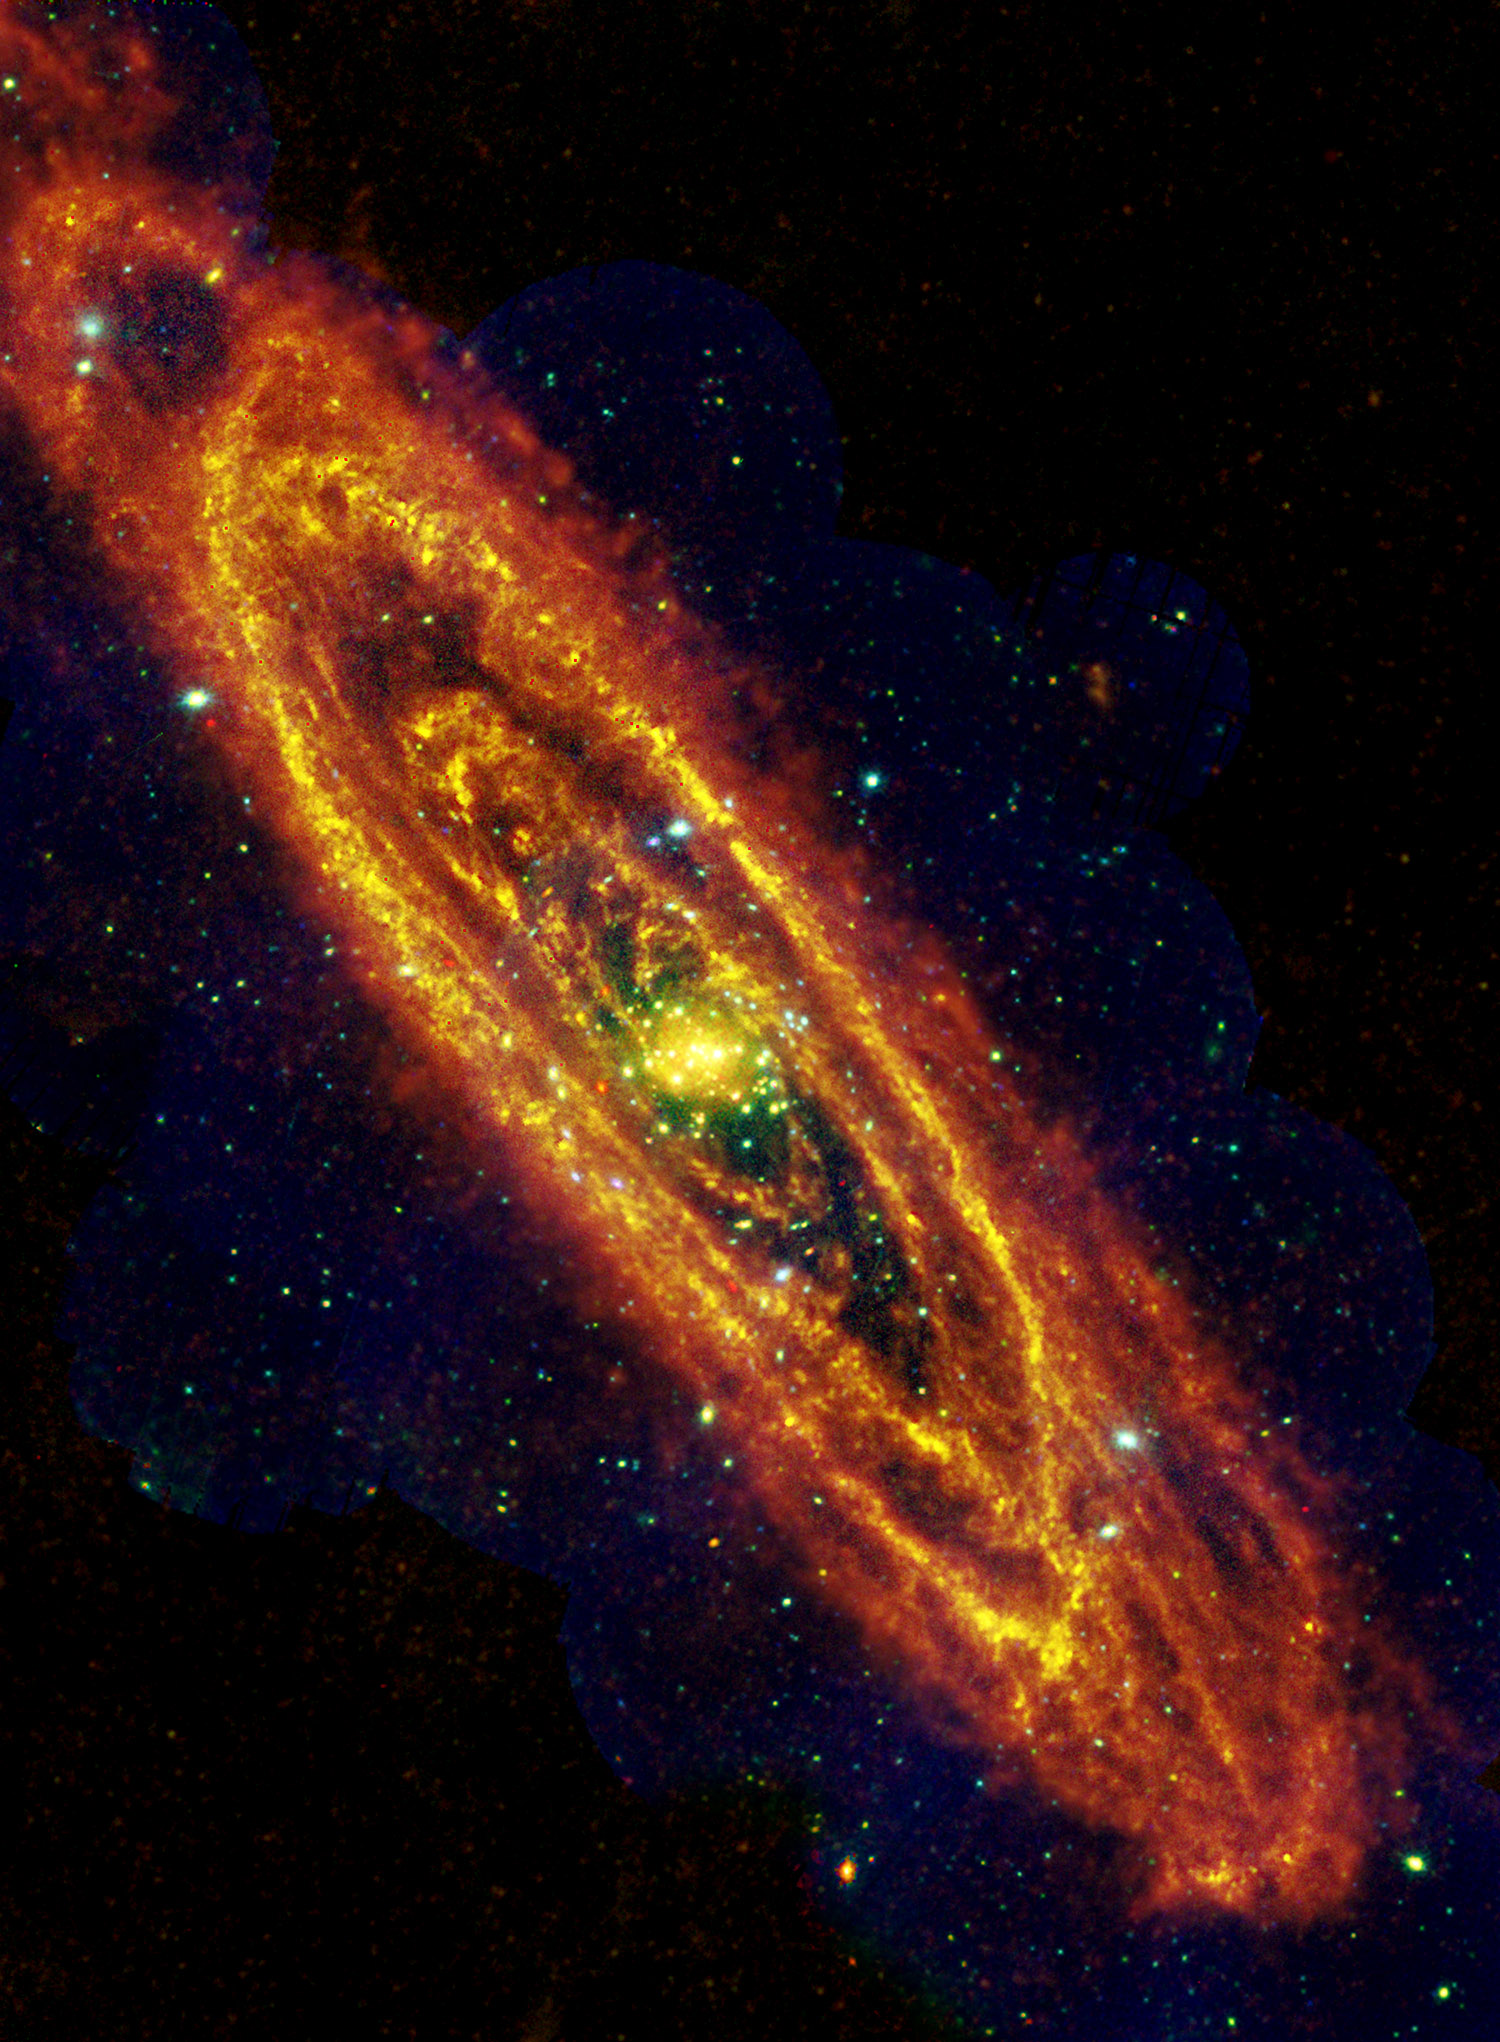 M31's once and future stars. A combined Herschel and XMM-Newton (x-ray) image of M31 showing dusty star-forming regions (Herschel) and the point-sources that represent highly evolved stars (XMM-Newton). The Herschel data were taken at 250 microns with SPIRE between 17 and 21 December 2010. In the XMM-Newton RGB image, red sources are those that have soft x-ray spectra, dominated by low-energy x-ray emission; these are normally low-mass x-ray binaries, while the blue sources are sources with hard x-ray spectra, dominated by high-energy emission, which are high-mass compact binaries with a neutron star, or black hole secondary. This image contains what is effectively a snapshot of the star formation history of M31 and its two satellite galaxies, M32 (superimposed on the spiral arm below the nucleus of M31) and M110 (very faintly visible in the Herschel image to the top right). Whereas M110 is essentially a dying galaxy, with only a tiny residual of star formation and no massive stars at all, M31 is very much alive and boiling with star formation activity in the dark rifts between its spiral arms.